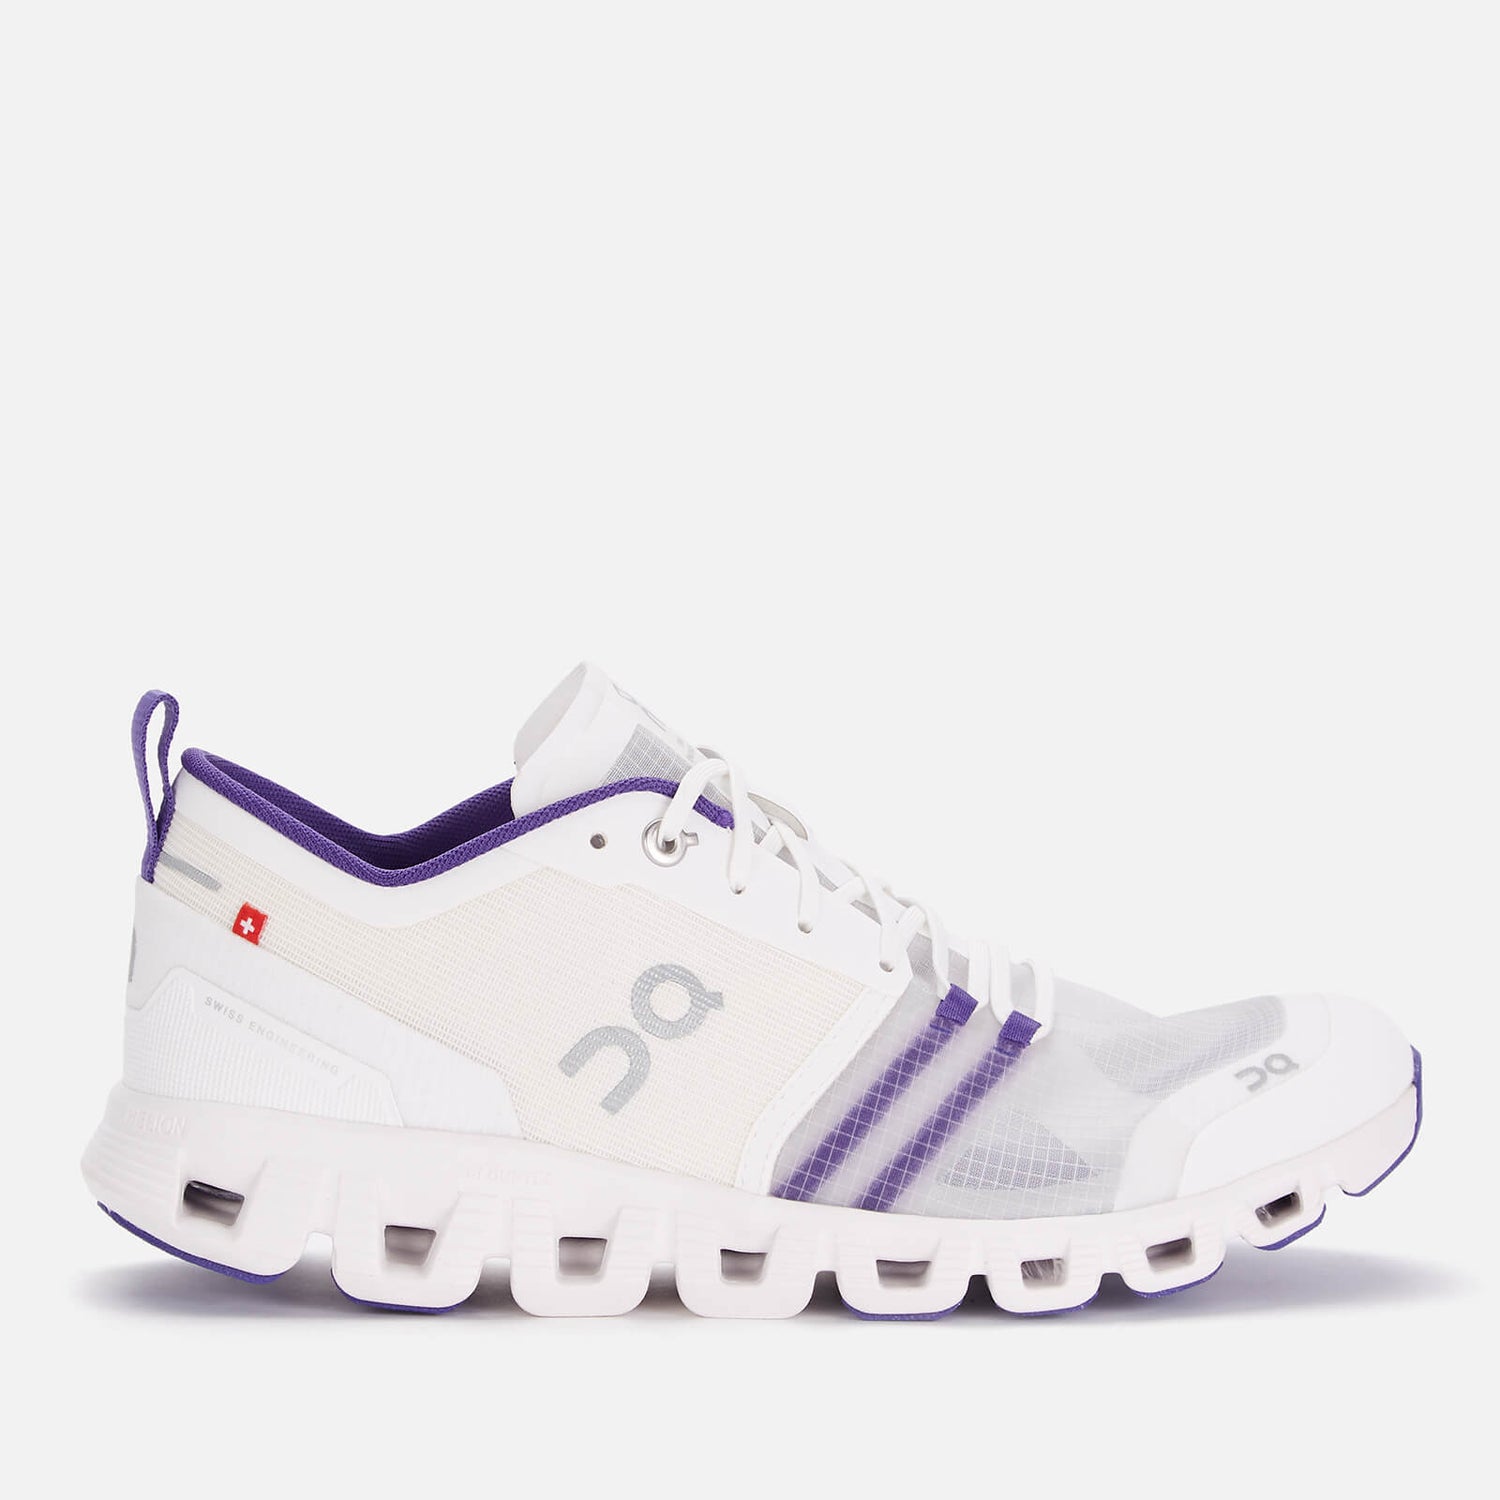 ON Women's Cloud X Shift Running Trainers - Frost/Twilight